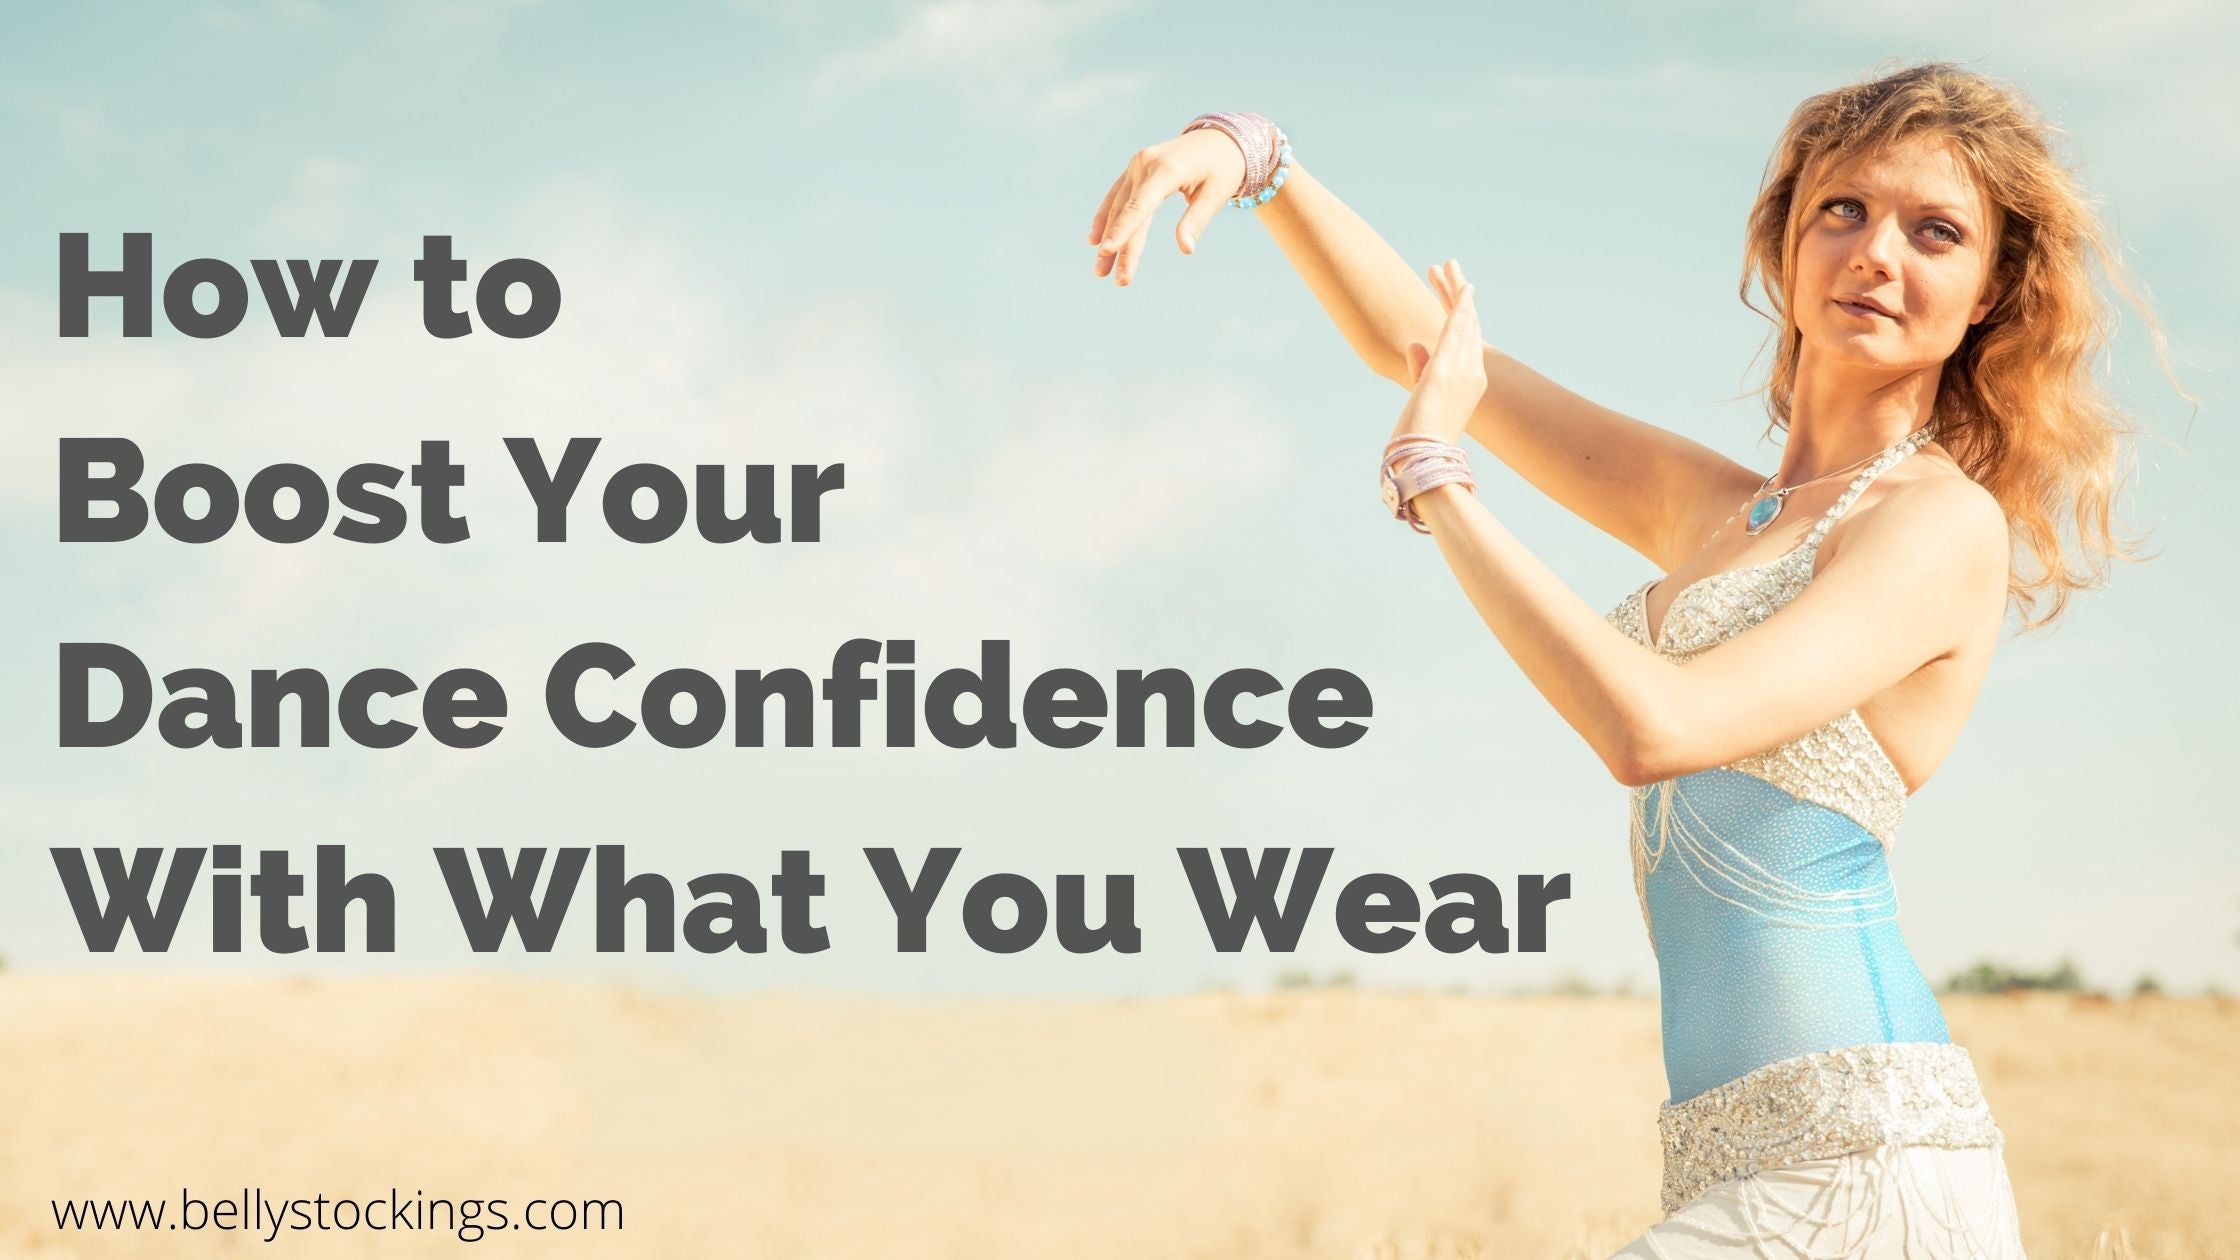 How to Boost Your Dance Confidence With What You Wear!